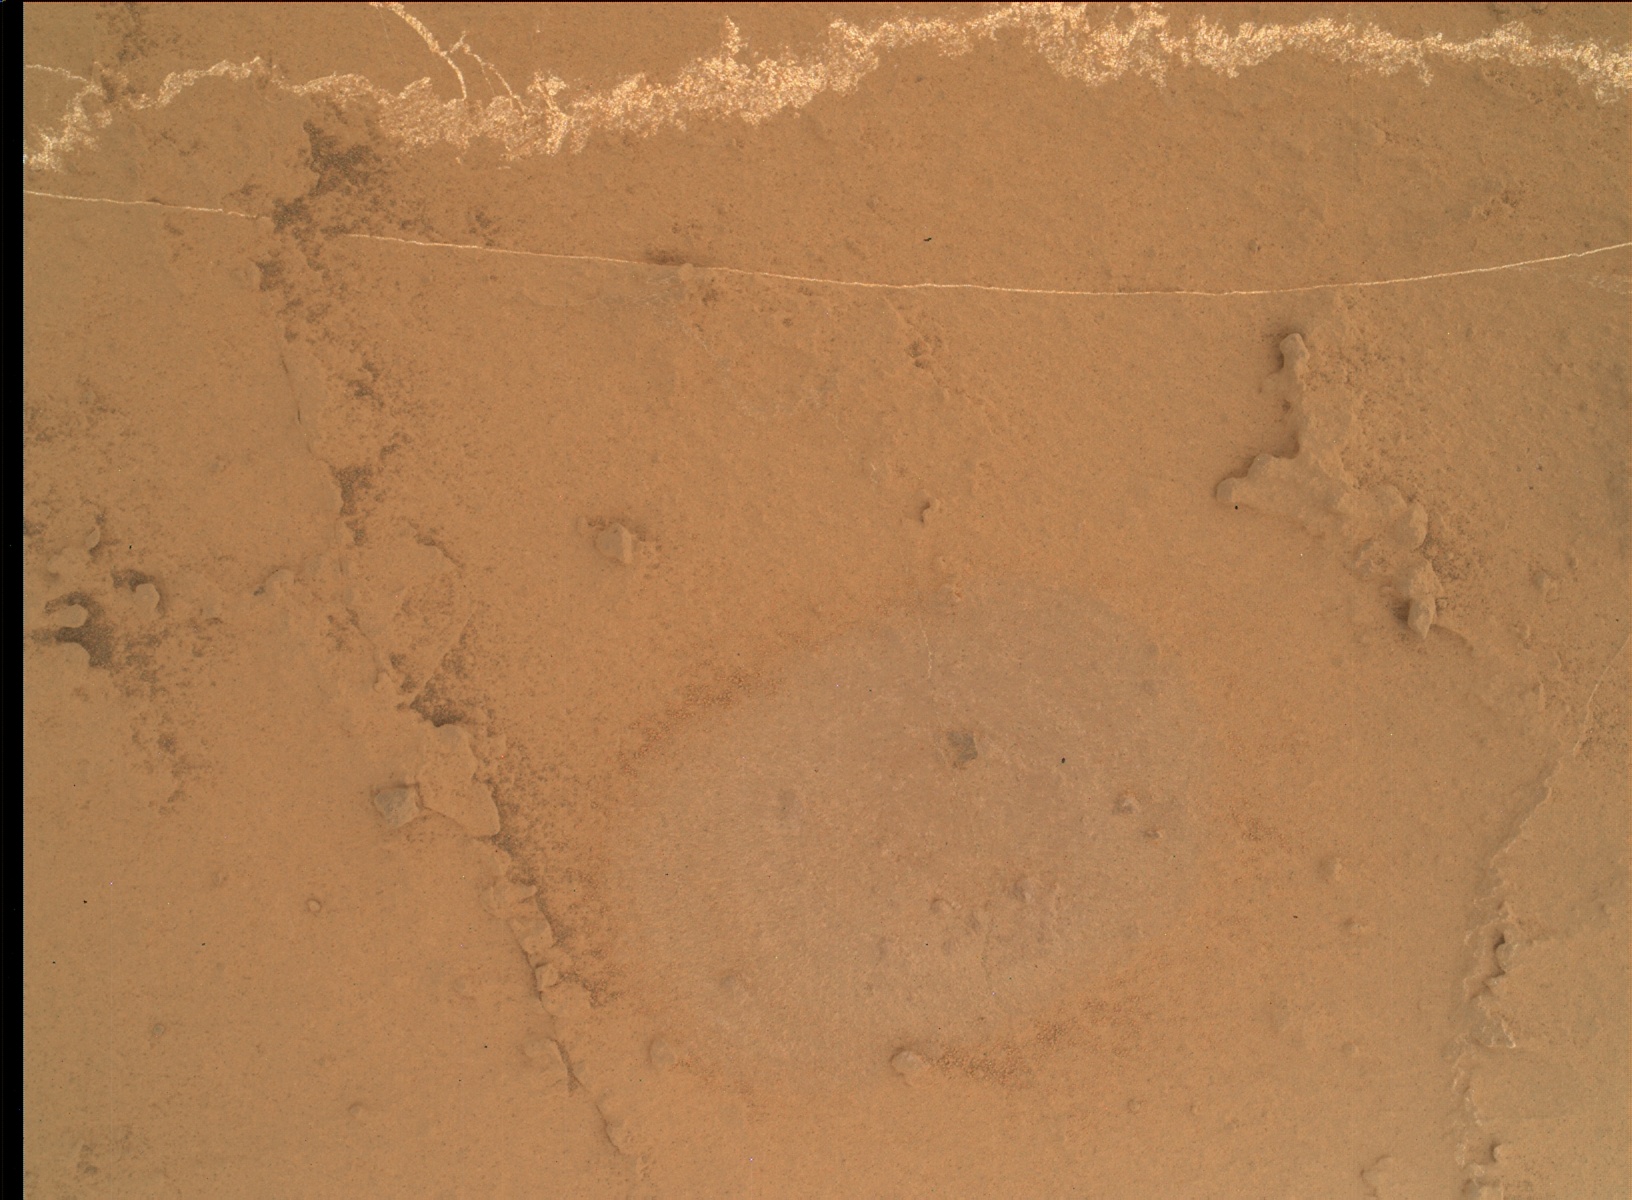 Nasa's Mars rover Curiosity acquired this image using its Mars Hand Lens Imager (MAHLI) on Sol 1461